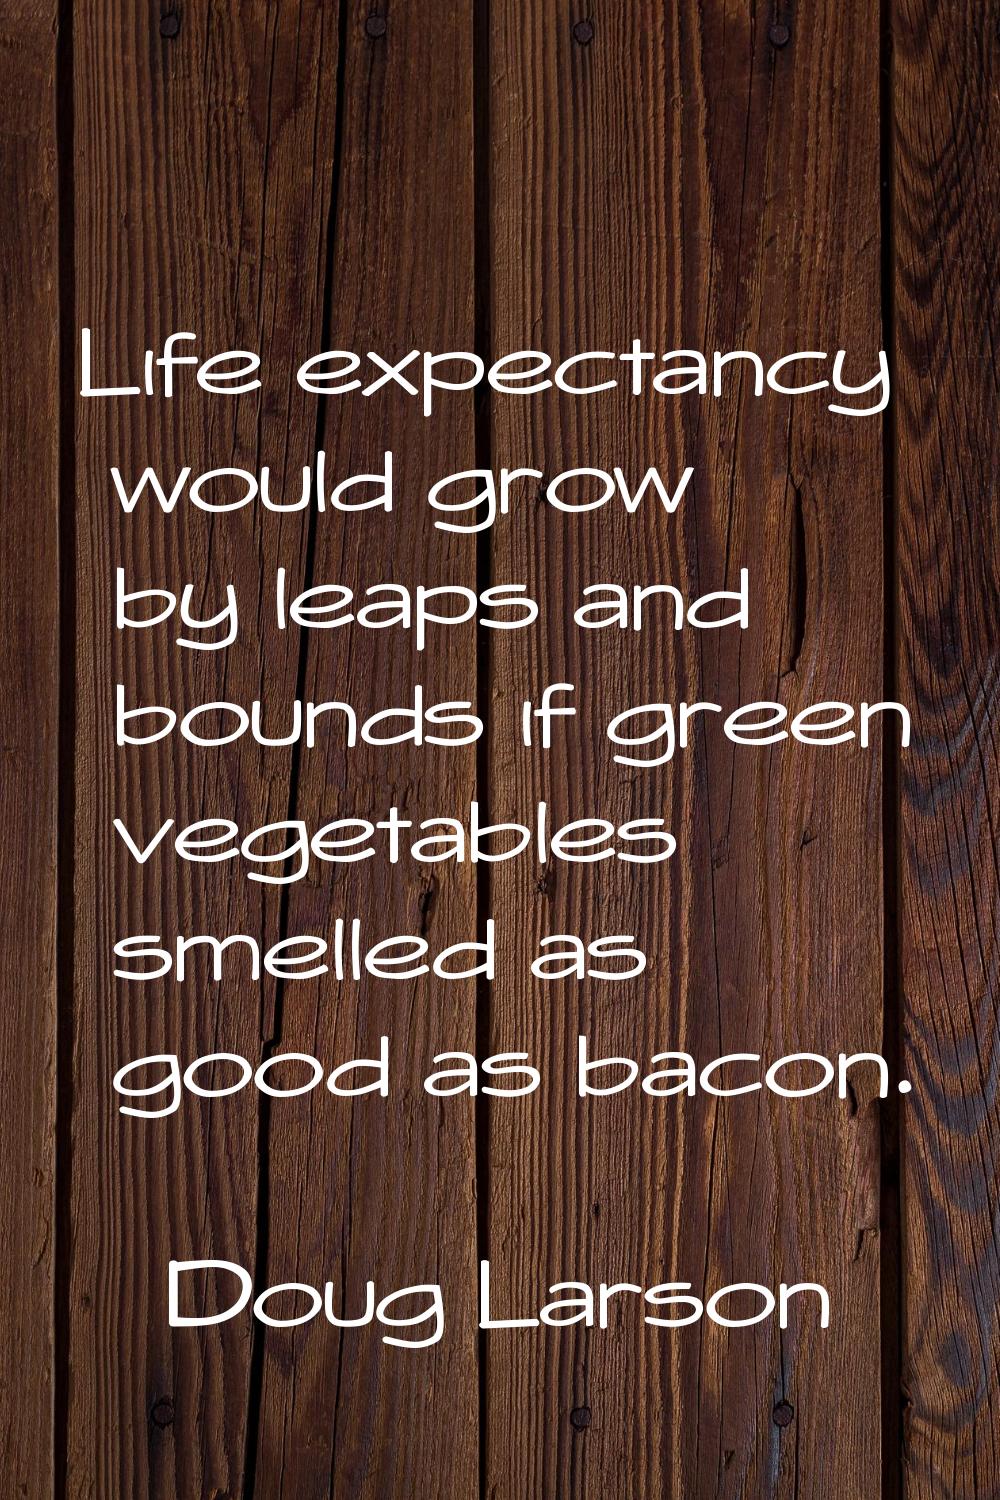 Life expectancy would grow by leaps and bounds if green vegetables smelled as good as bacon.